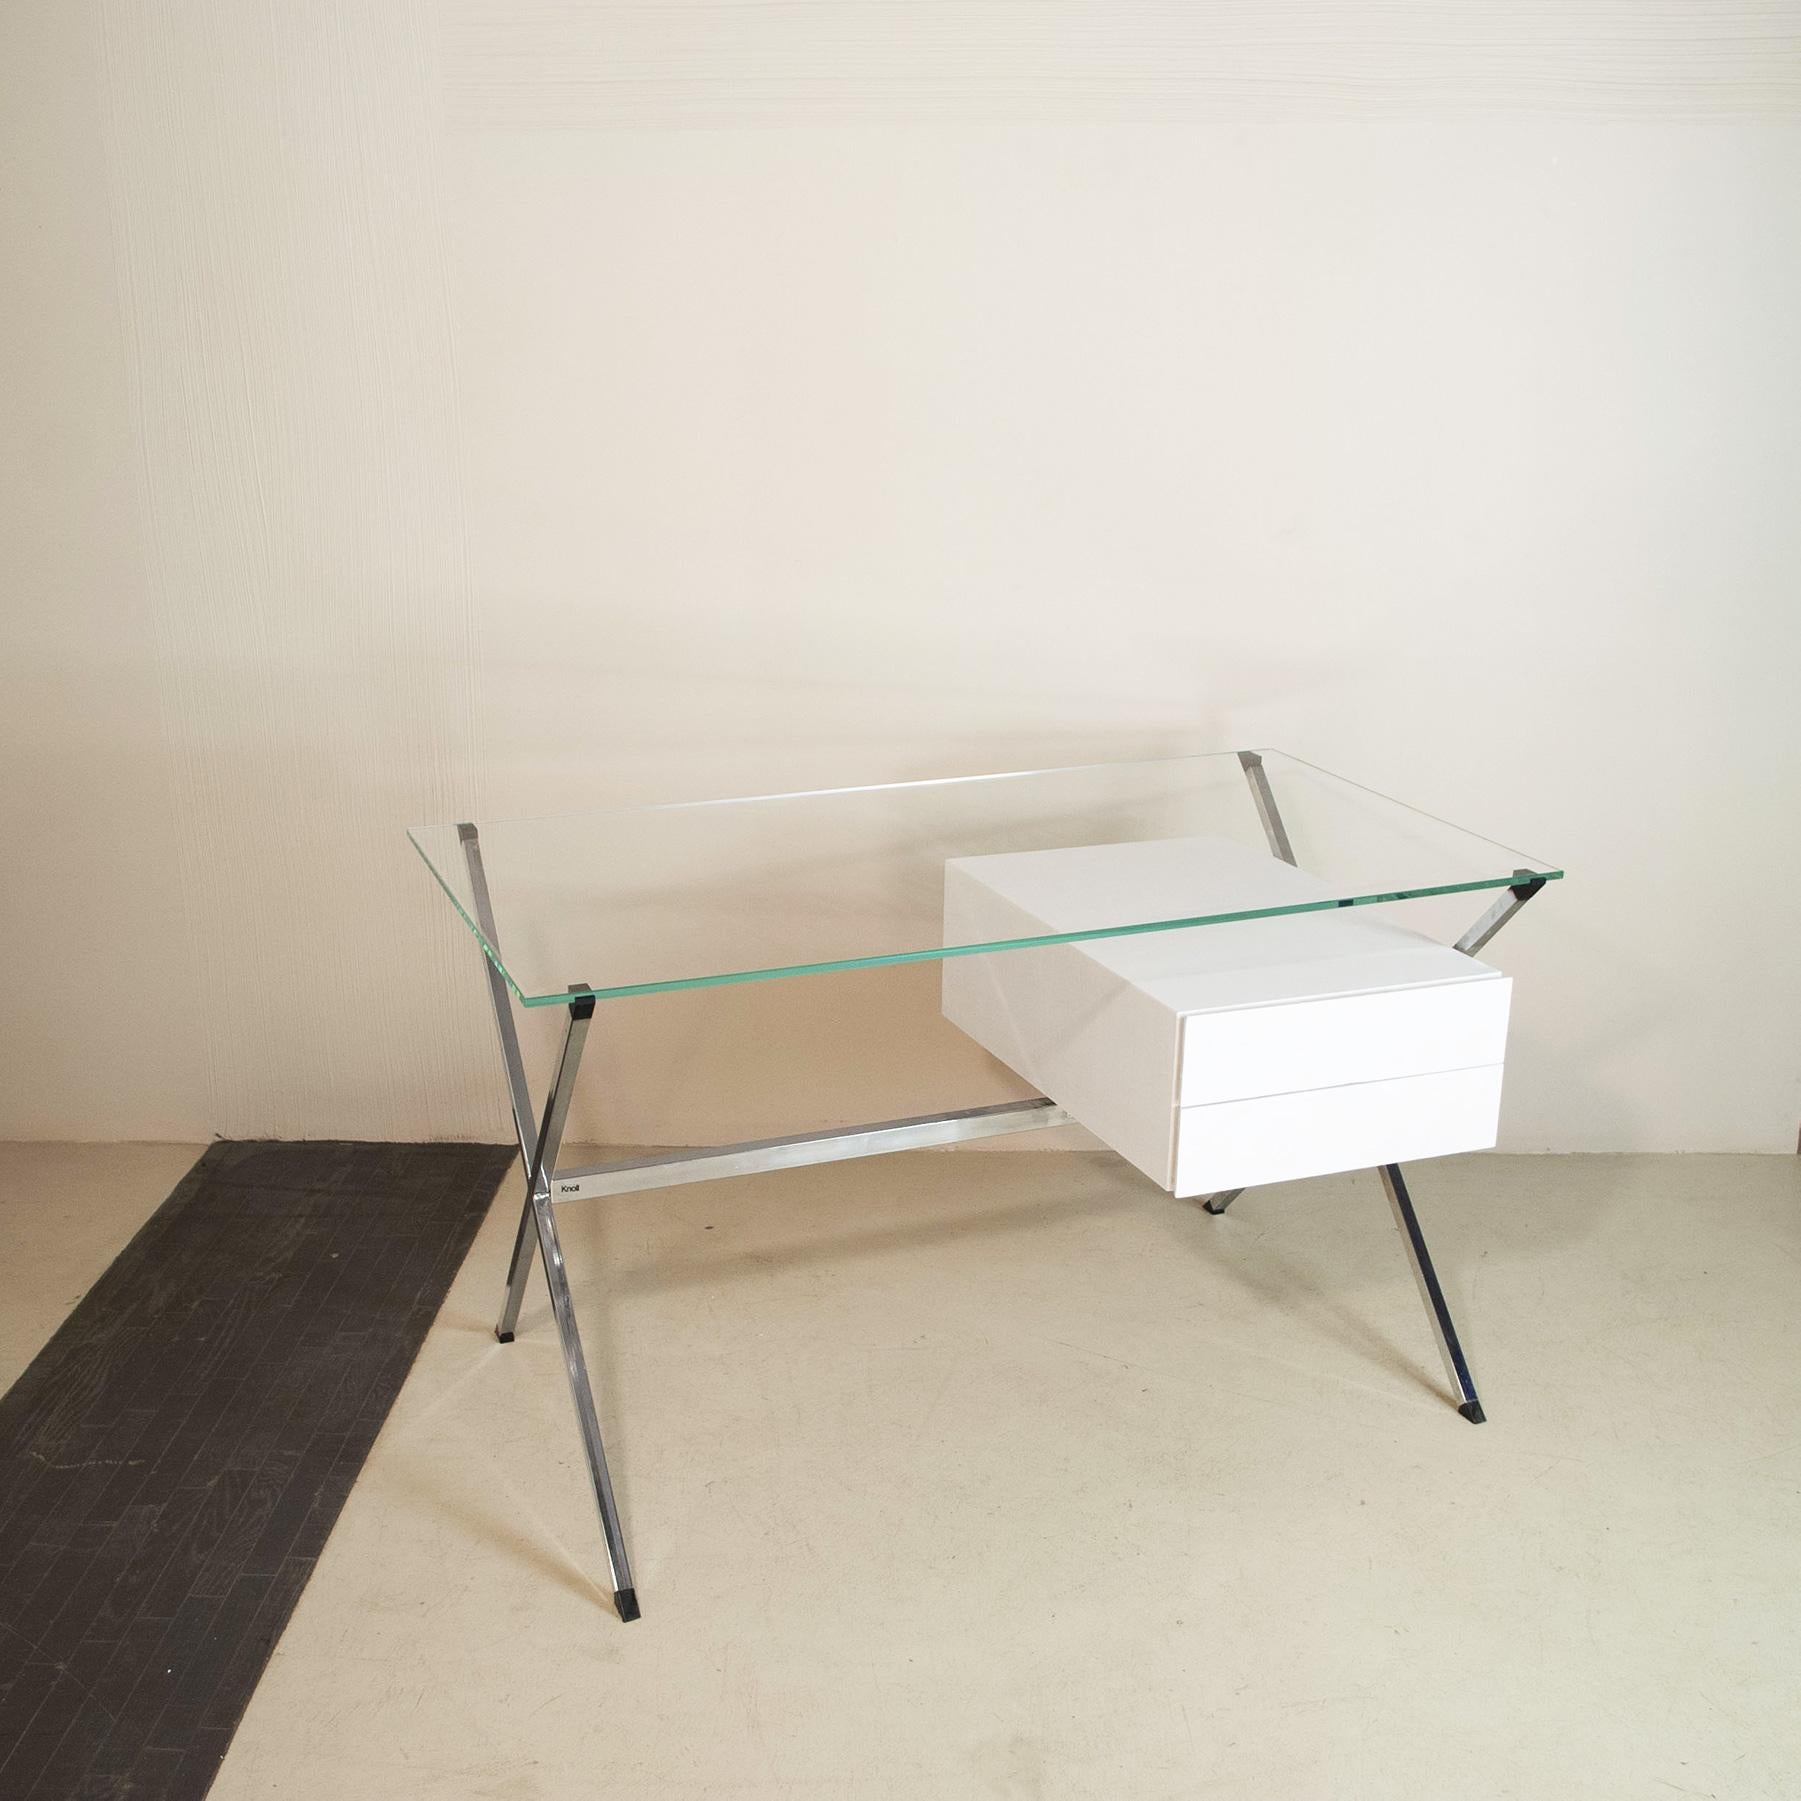 Stickers.Stunning Franco Albini '1928' desk for Knoll international, this example 1958. A pebbled glass top and stunning patina really take this piece to a whole new level. The enameled metal frame shows gorgeous age accumulated patina. The wood